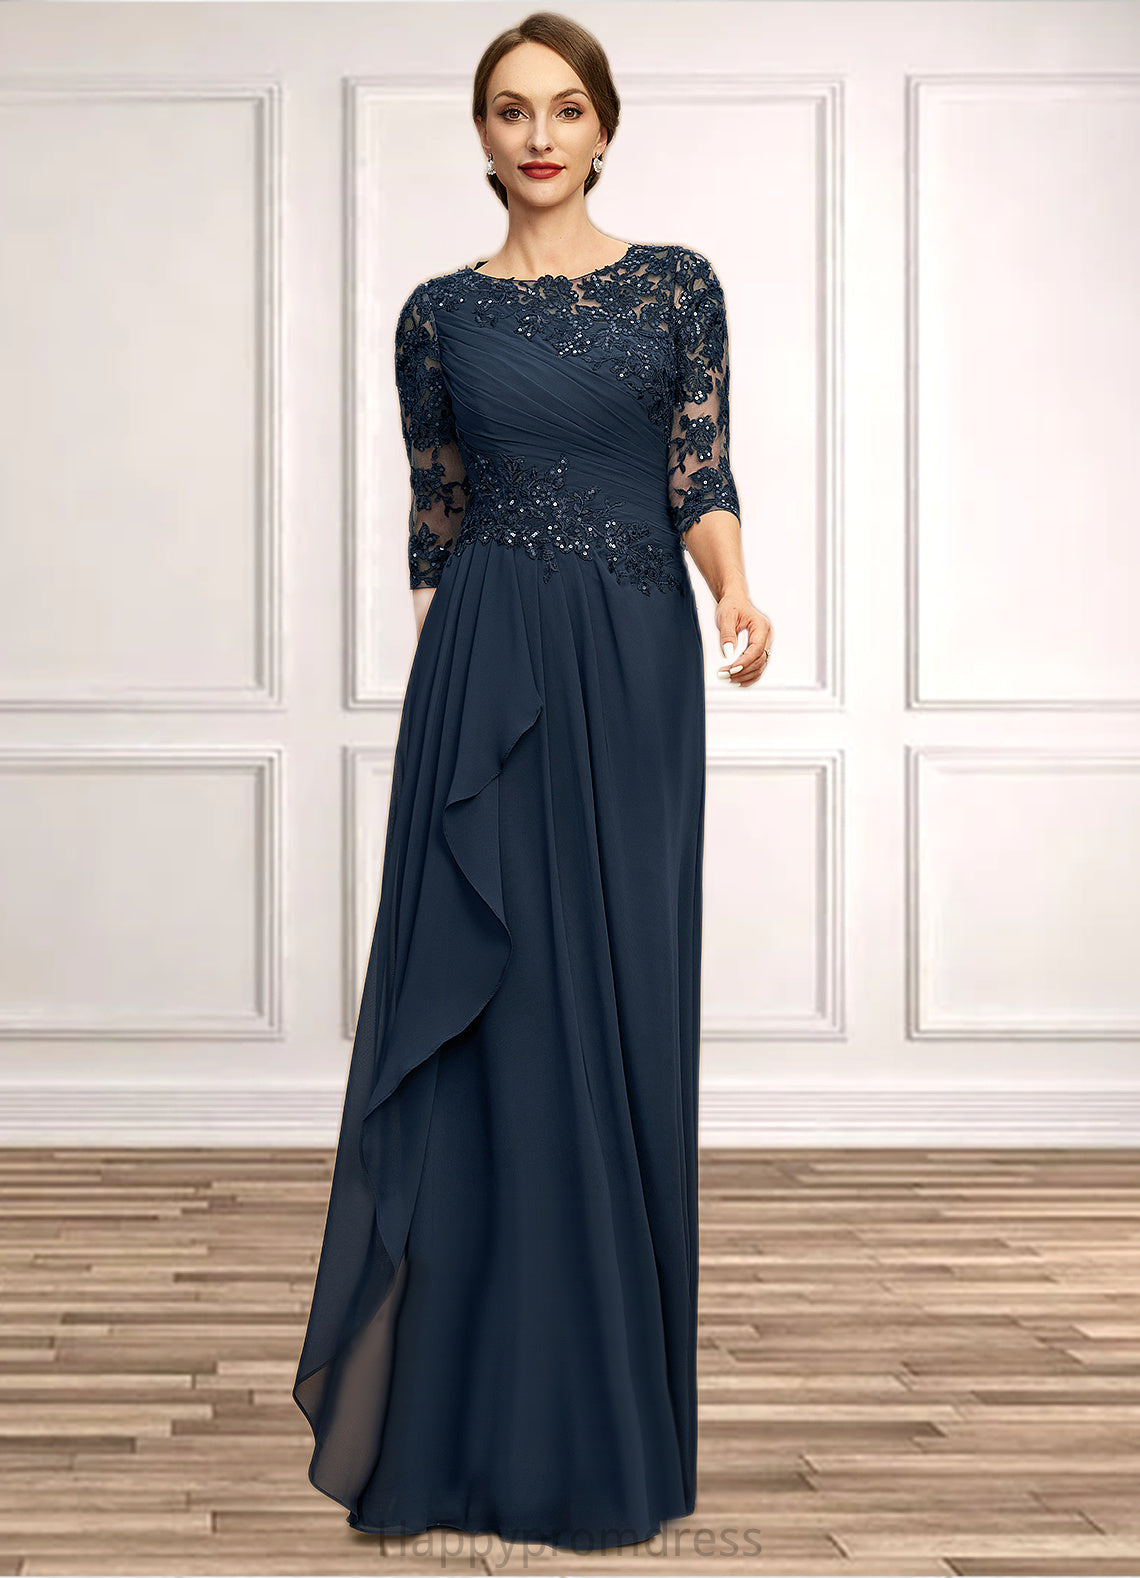 Isabella A-line Scoop Floor-Length Chiffon Lace Mother of the Bride Dress With Cascading Ruffles Sequins XXSP0021673